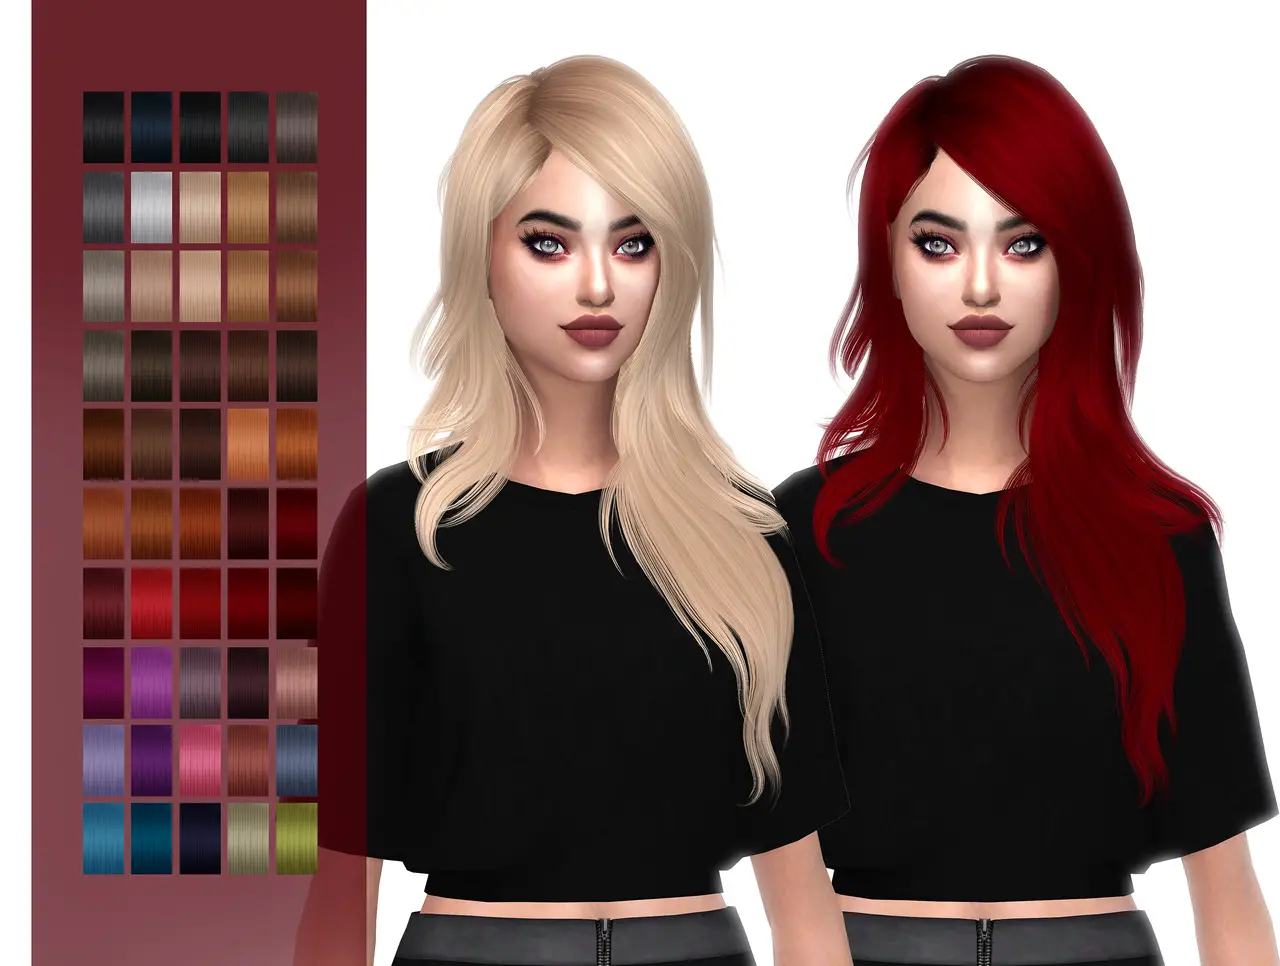 Sims 4 Hairs The Sims Resource Hallow`s Serenity Hair Retextured